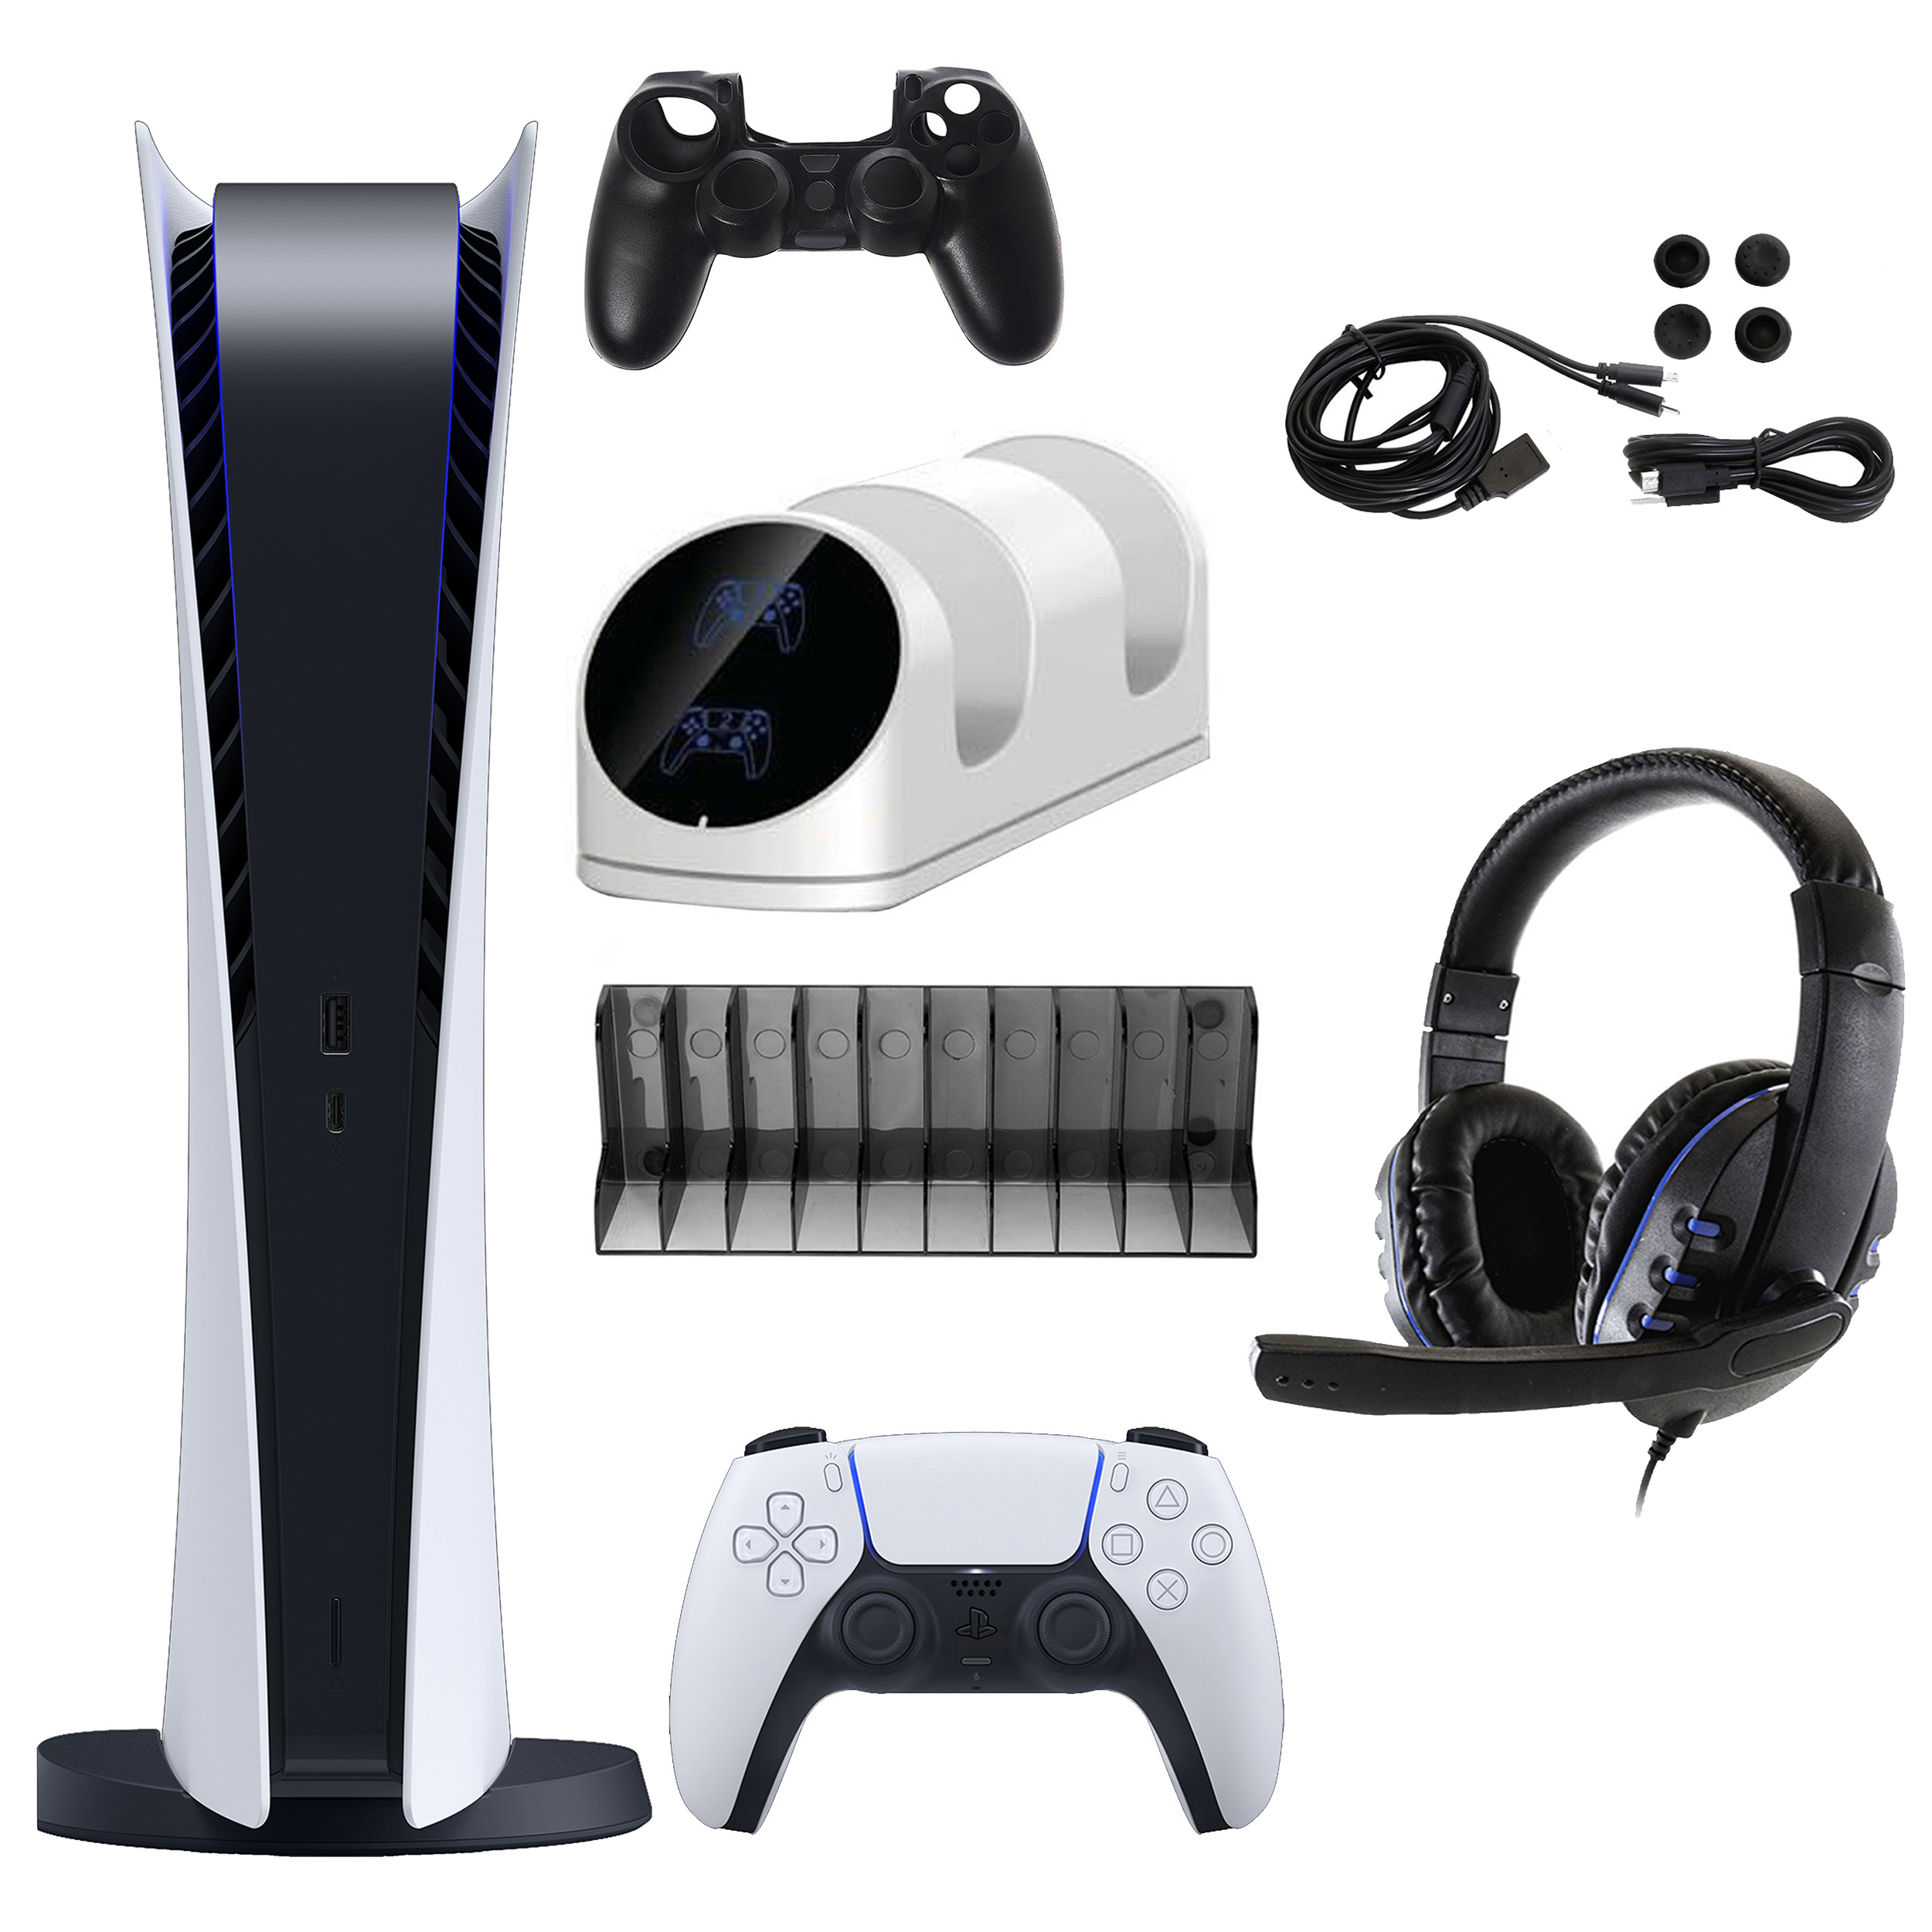 Sony PlayStation 5 Digital Console with Accessories Kit (PS5 Digital Console) - image 1 of 3